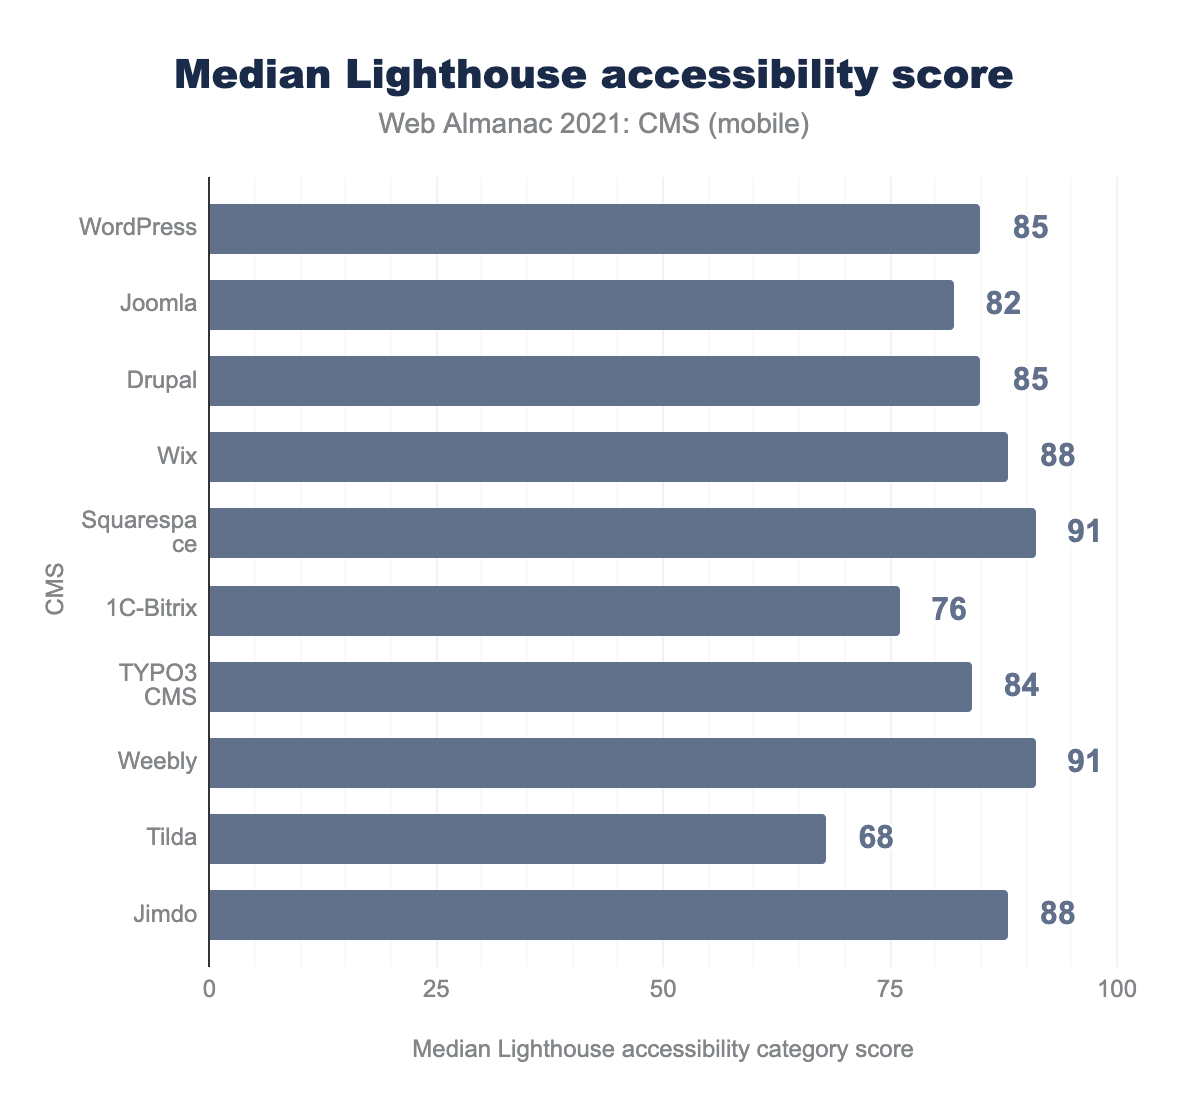 Top 10 CMSs median Lighthouse accessibility score.